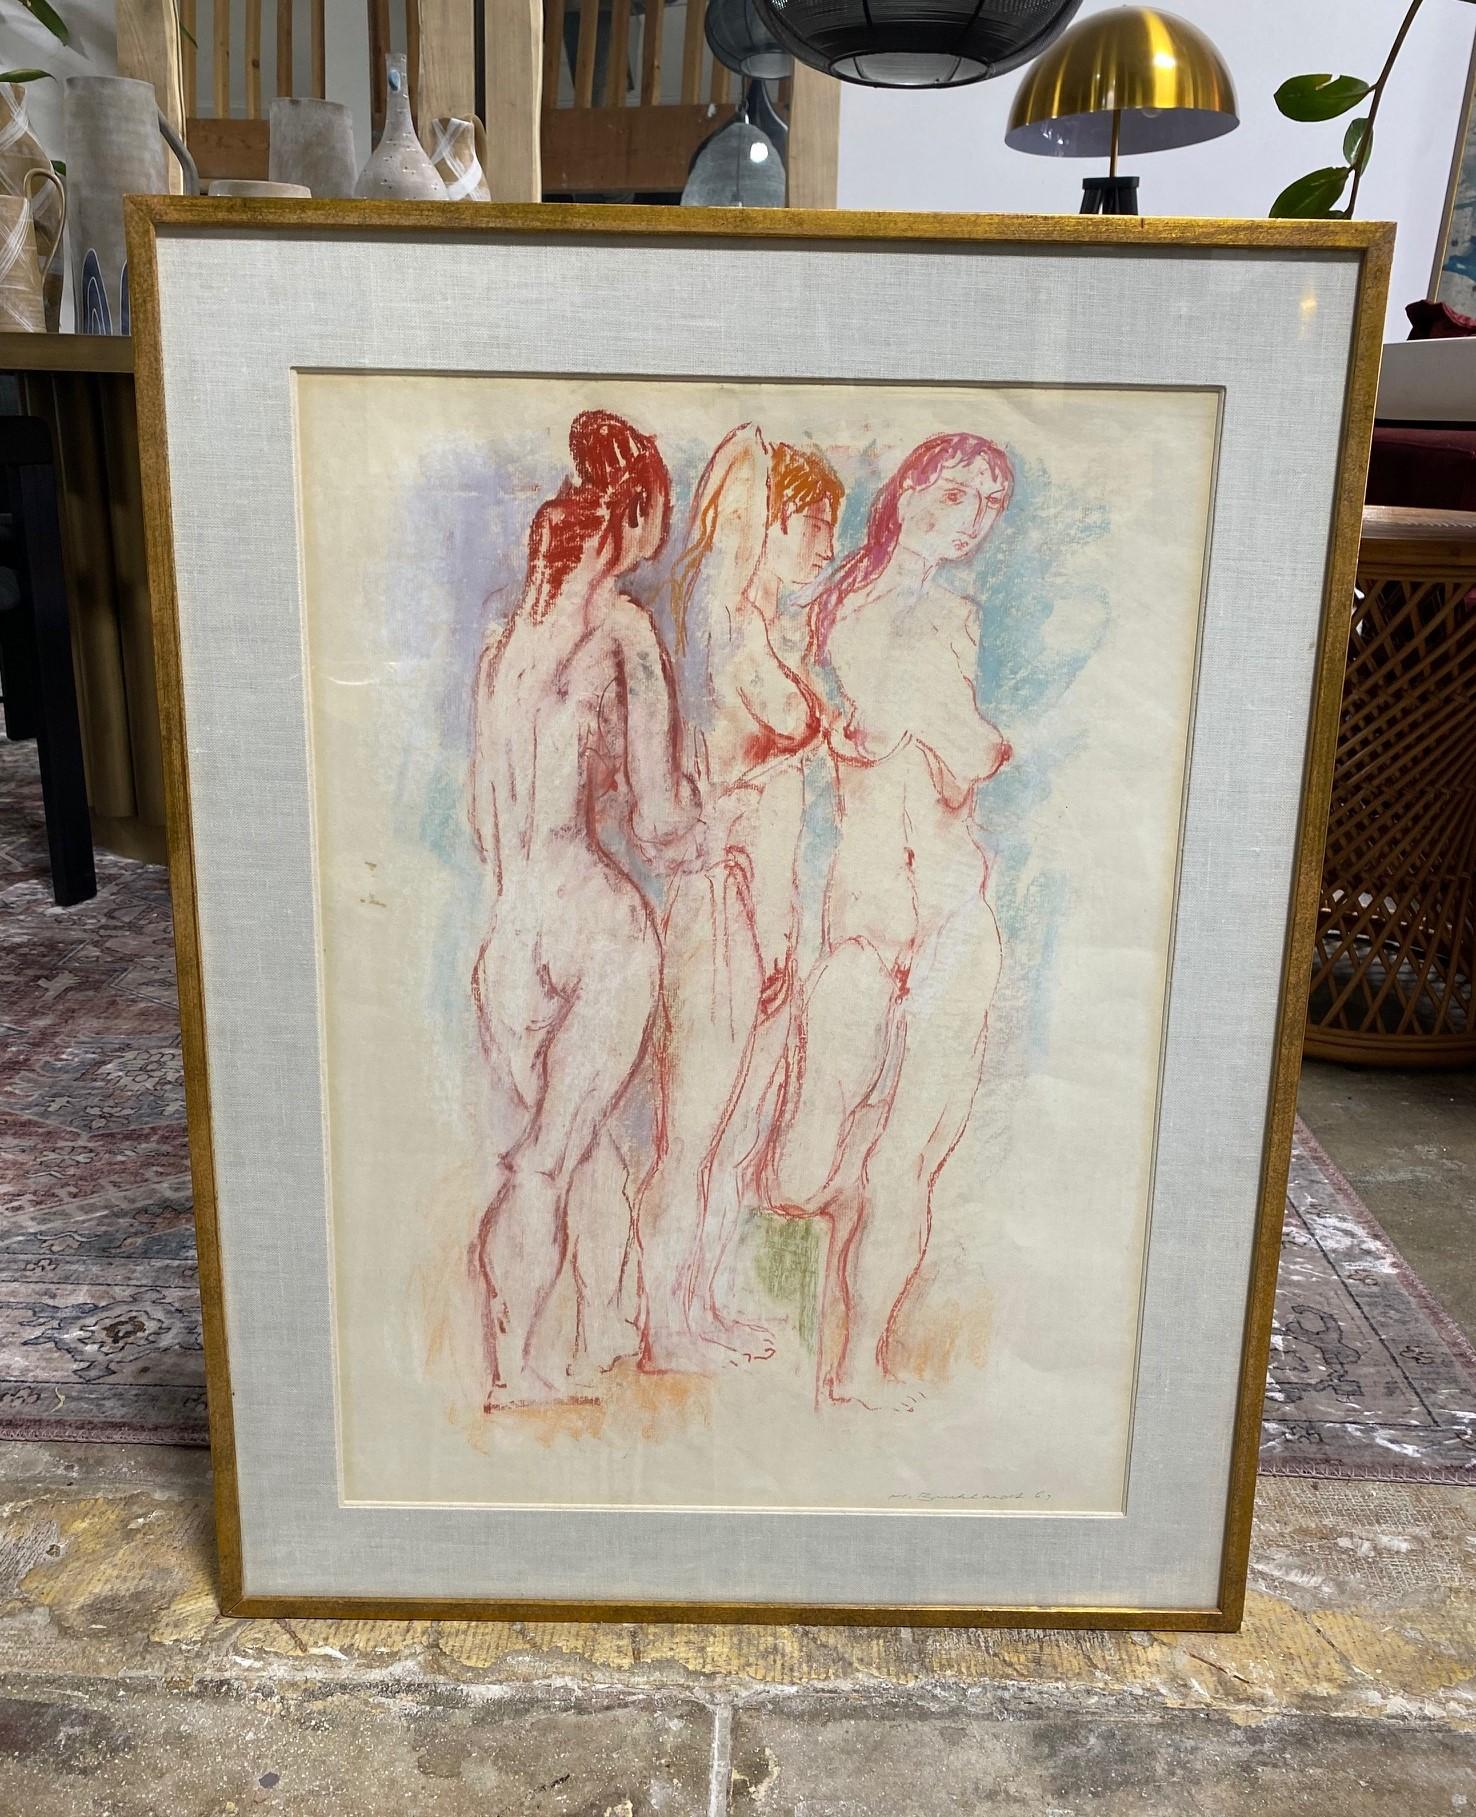 A wonderful, highly engaging large original abstract pastel painting / drawing of three nude female figures by Swiss / American / Californian painter-artist Hans Burkhardt. 

This work is hand pencil signed and dated (1967) by the artist. 

An